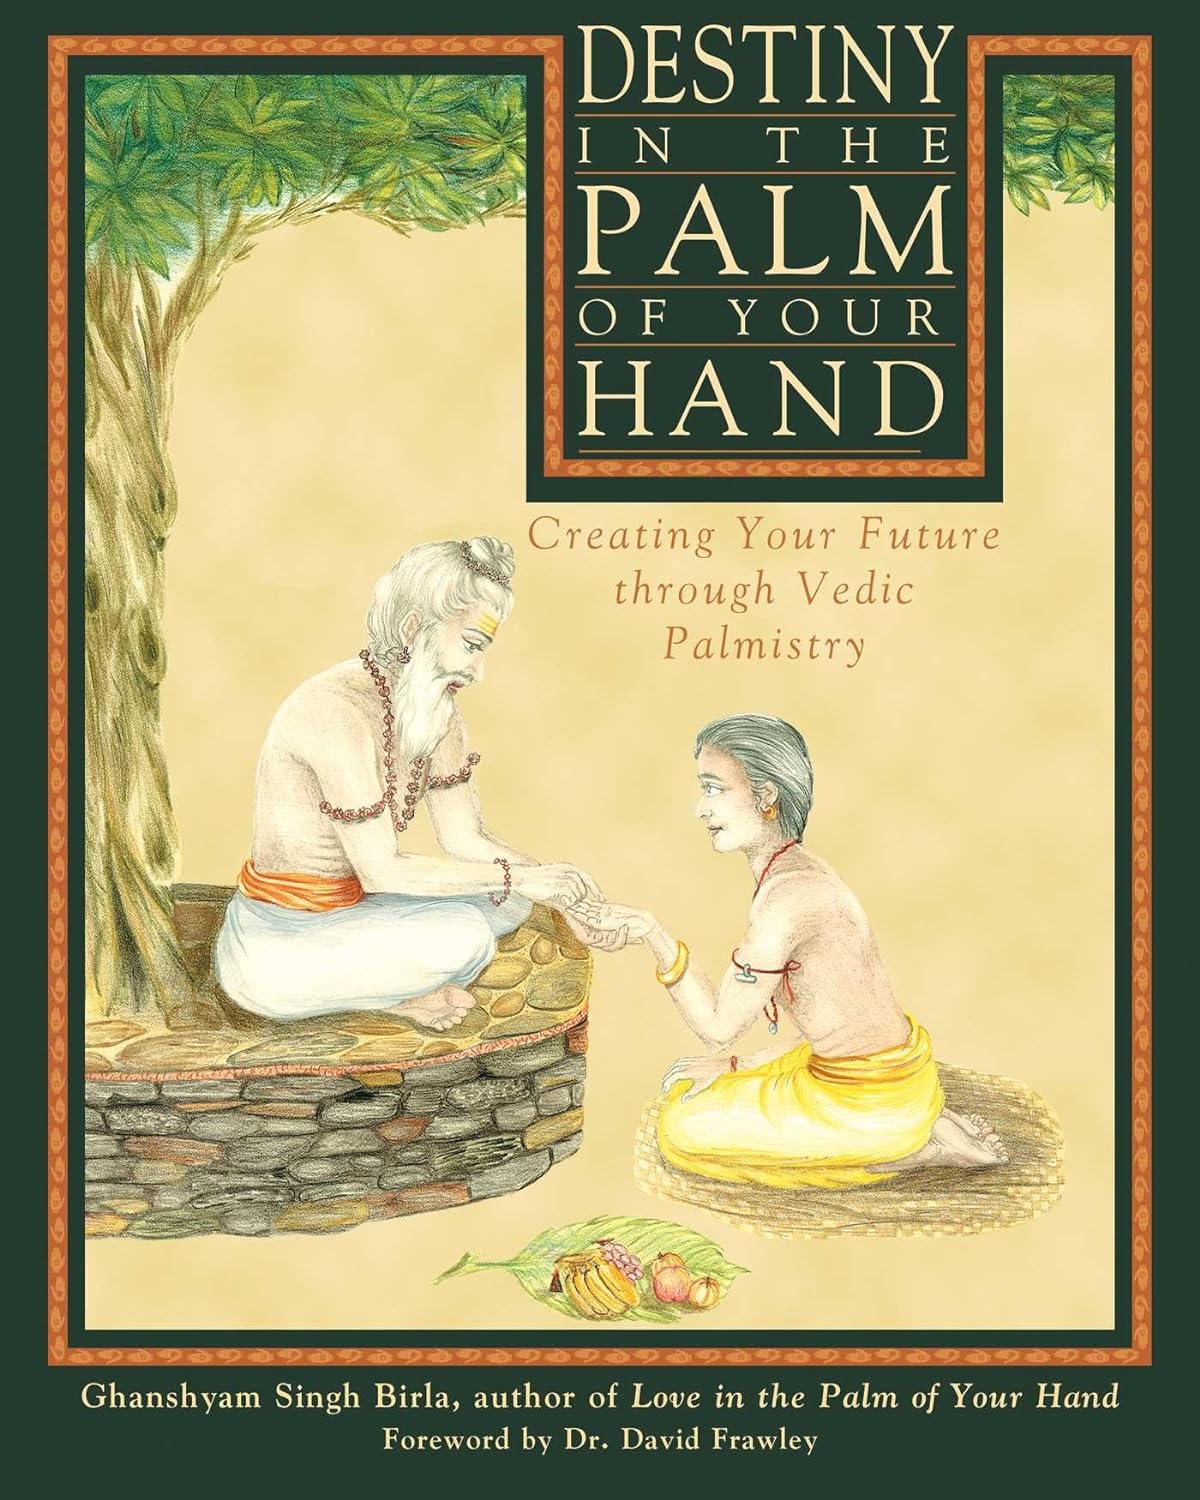 Destiny in the Palm of your Hand | Vedic Palmistry | Pamistry | Fortune telling